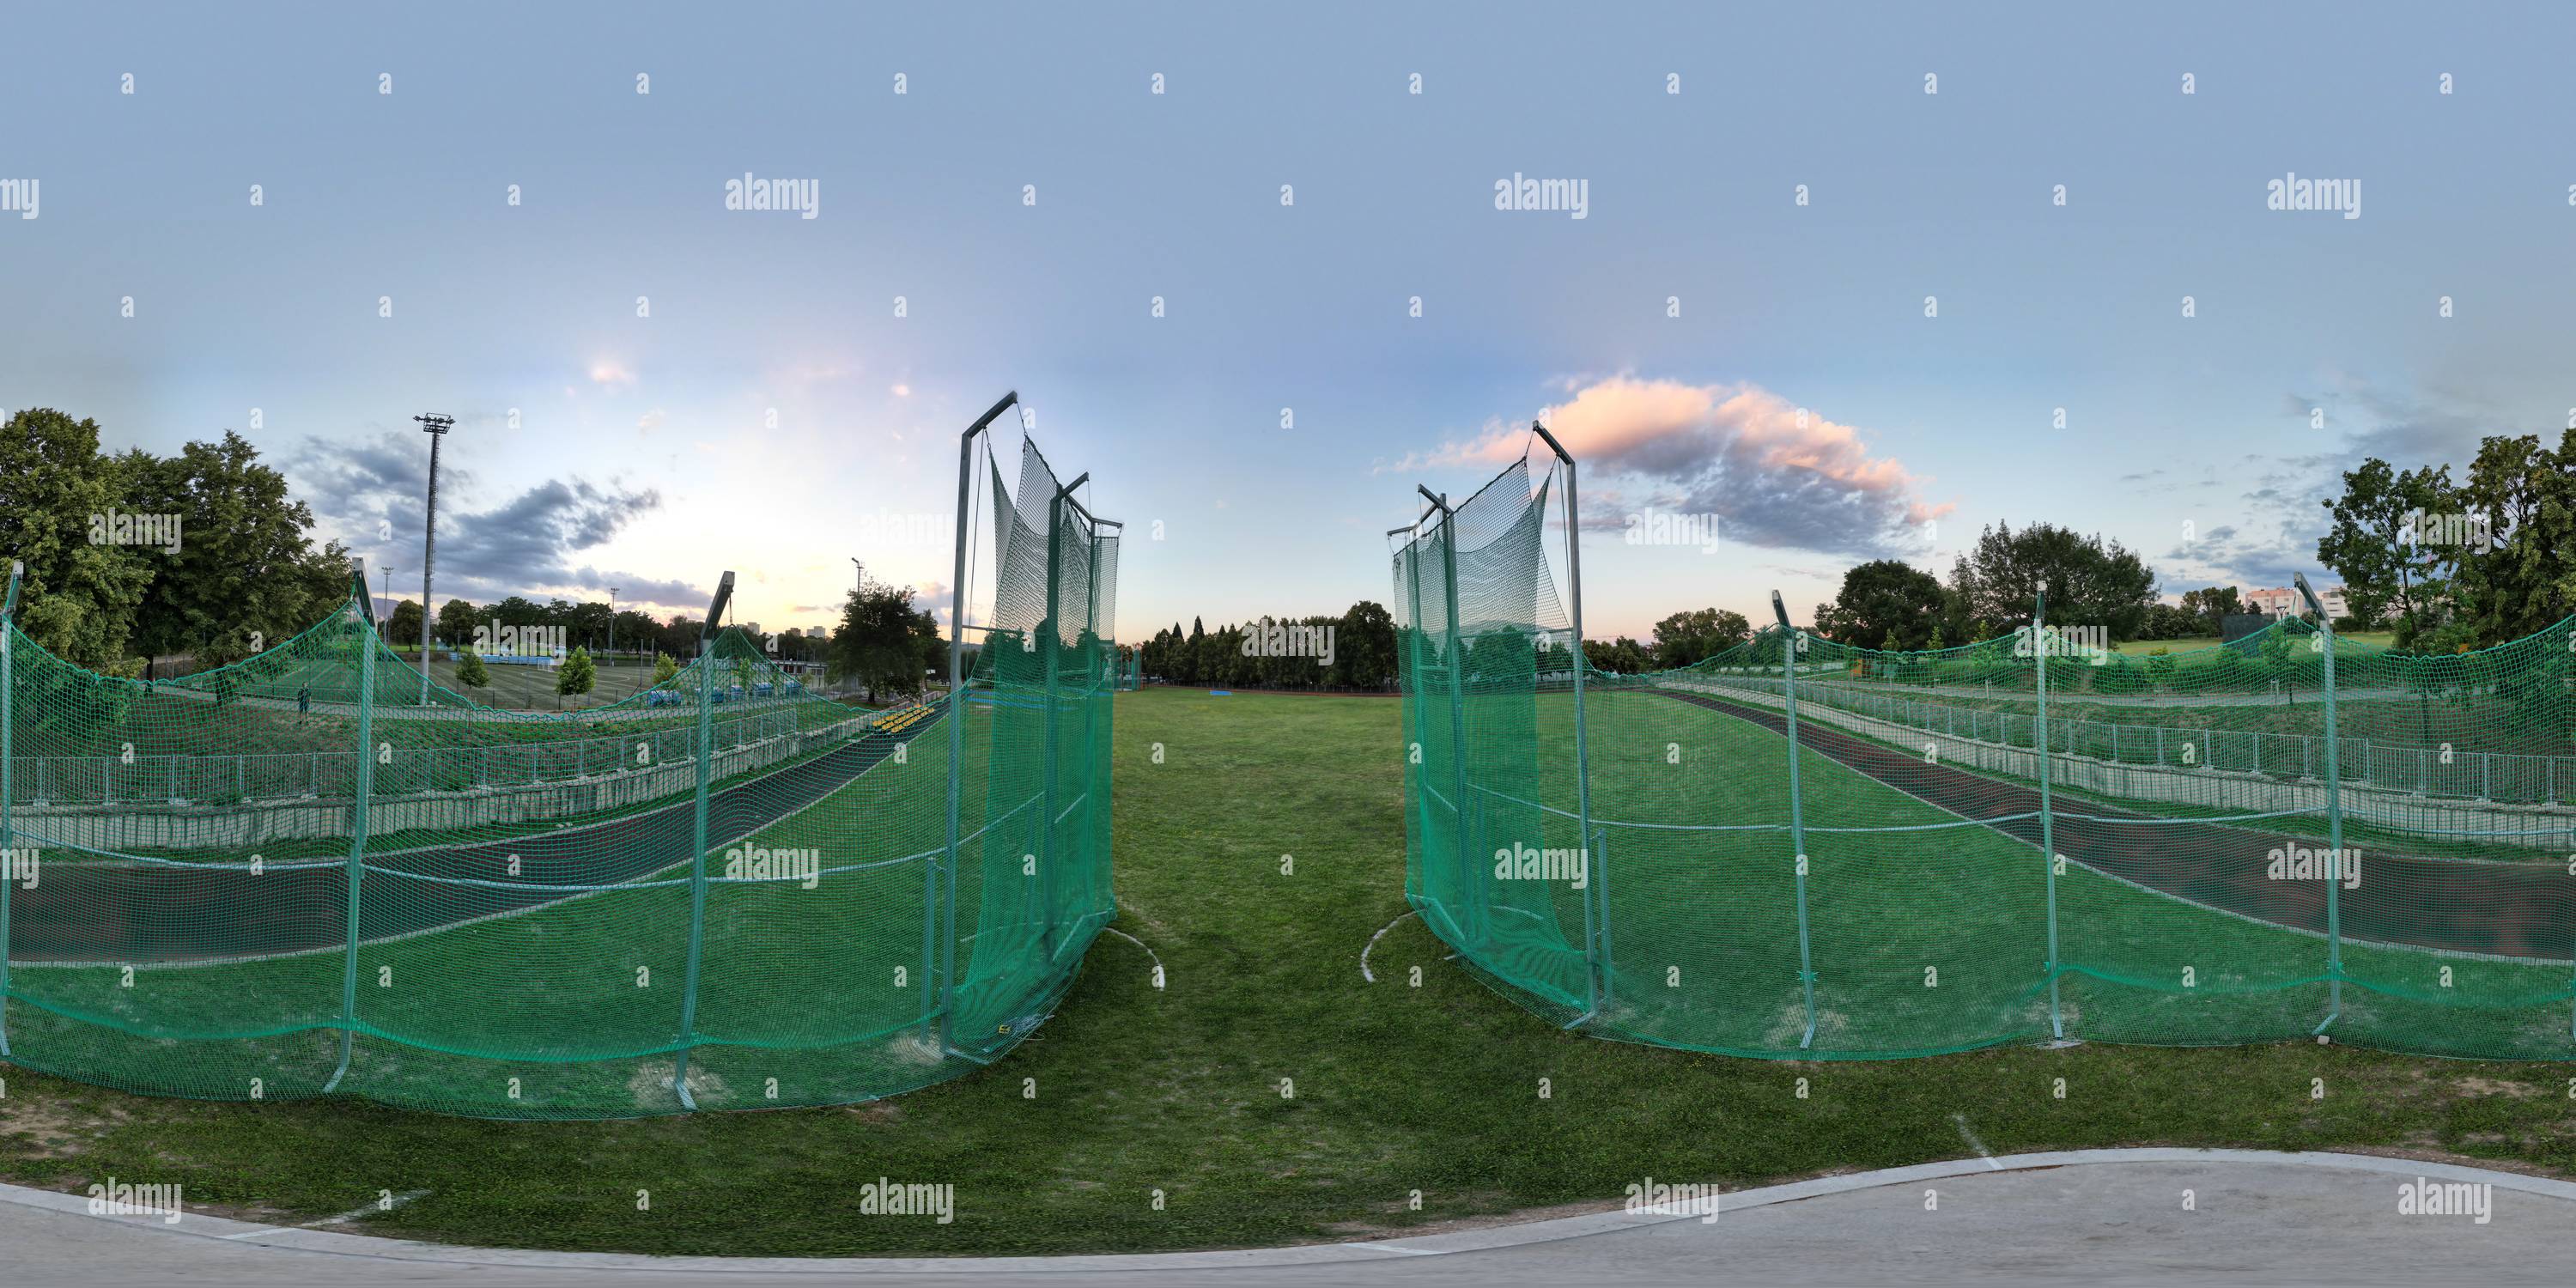 360 degree panoramic view of Inside the Net